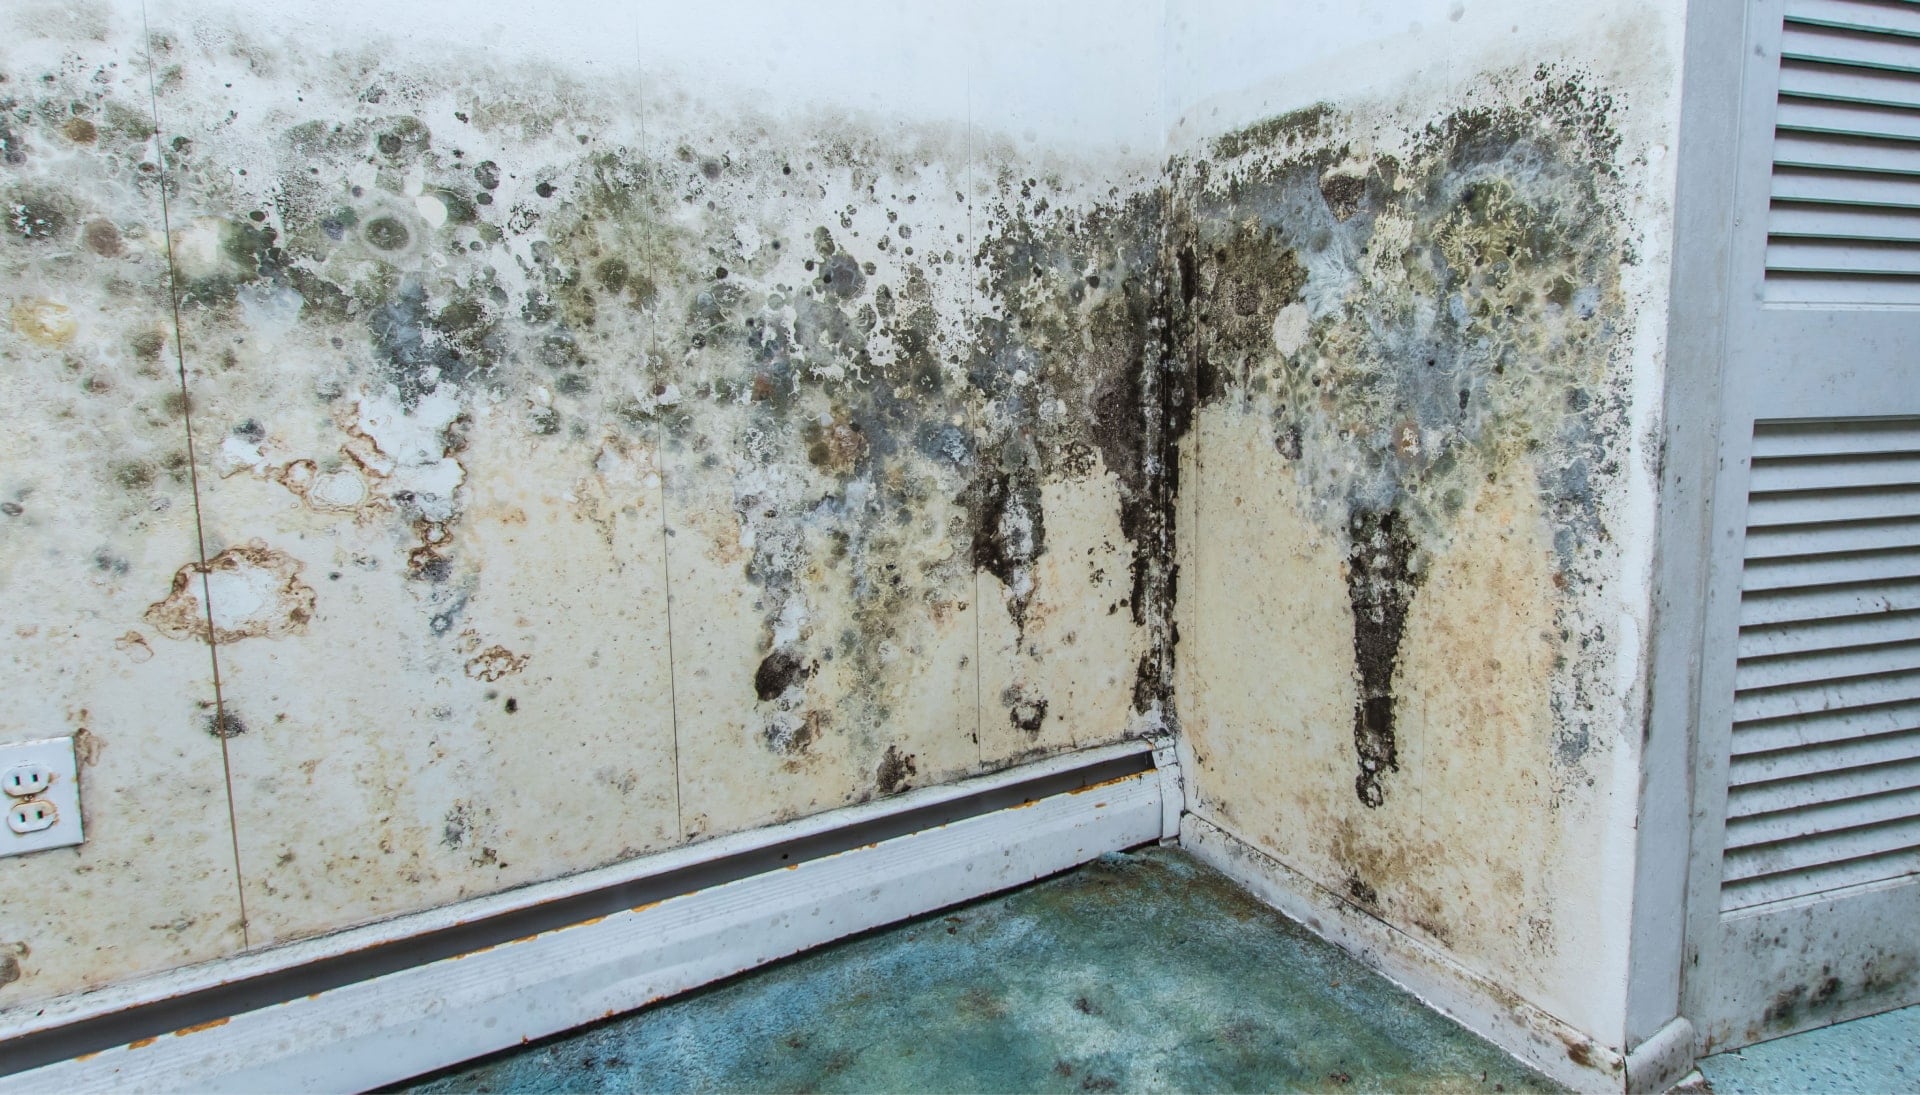 Professional mold removal, odor control, and water damage restoration service in Cary, North Carolina.